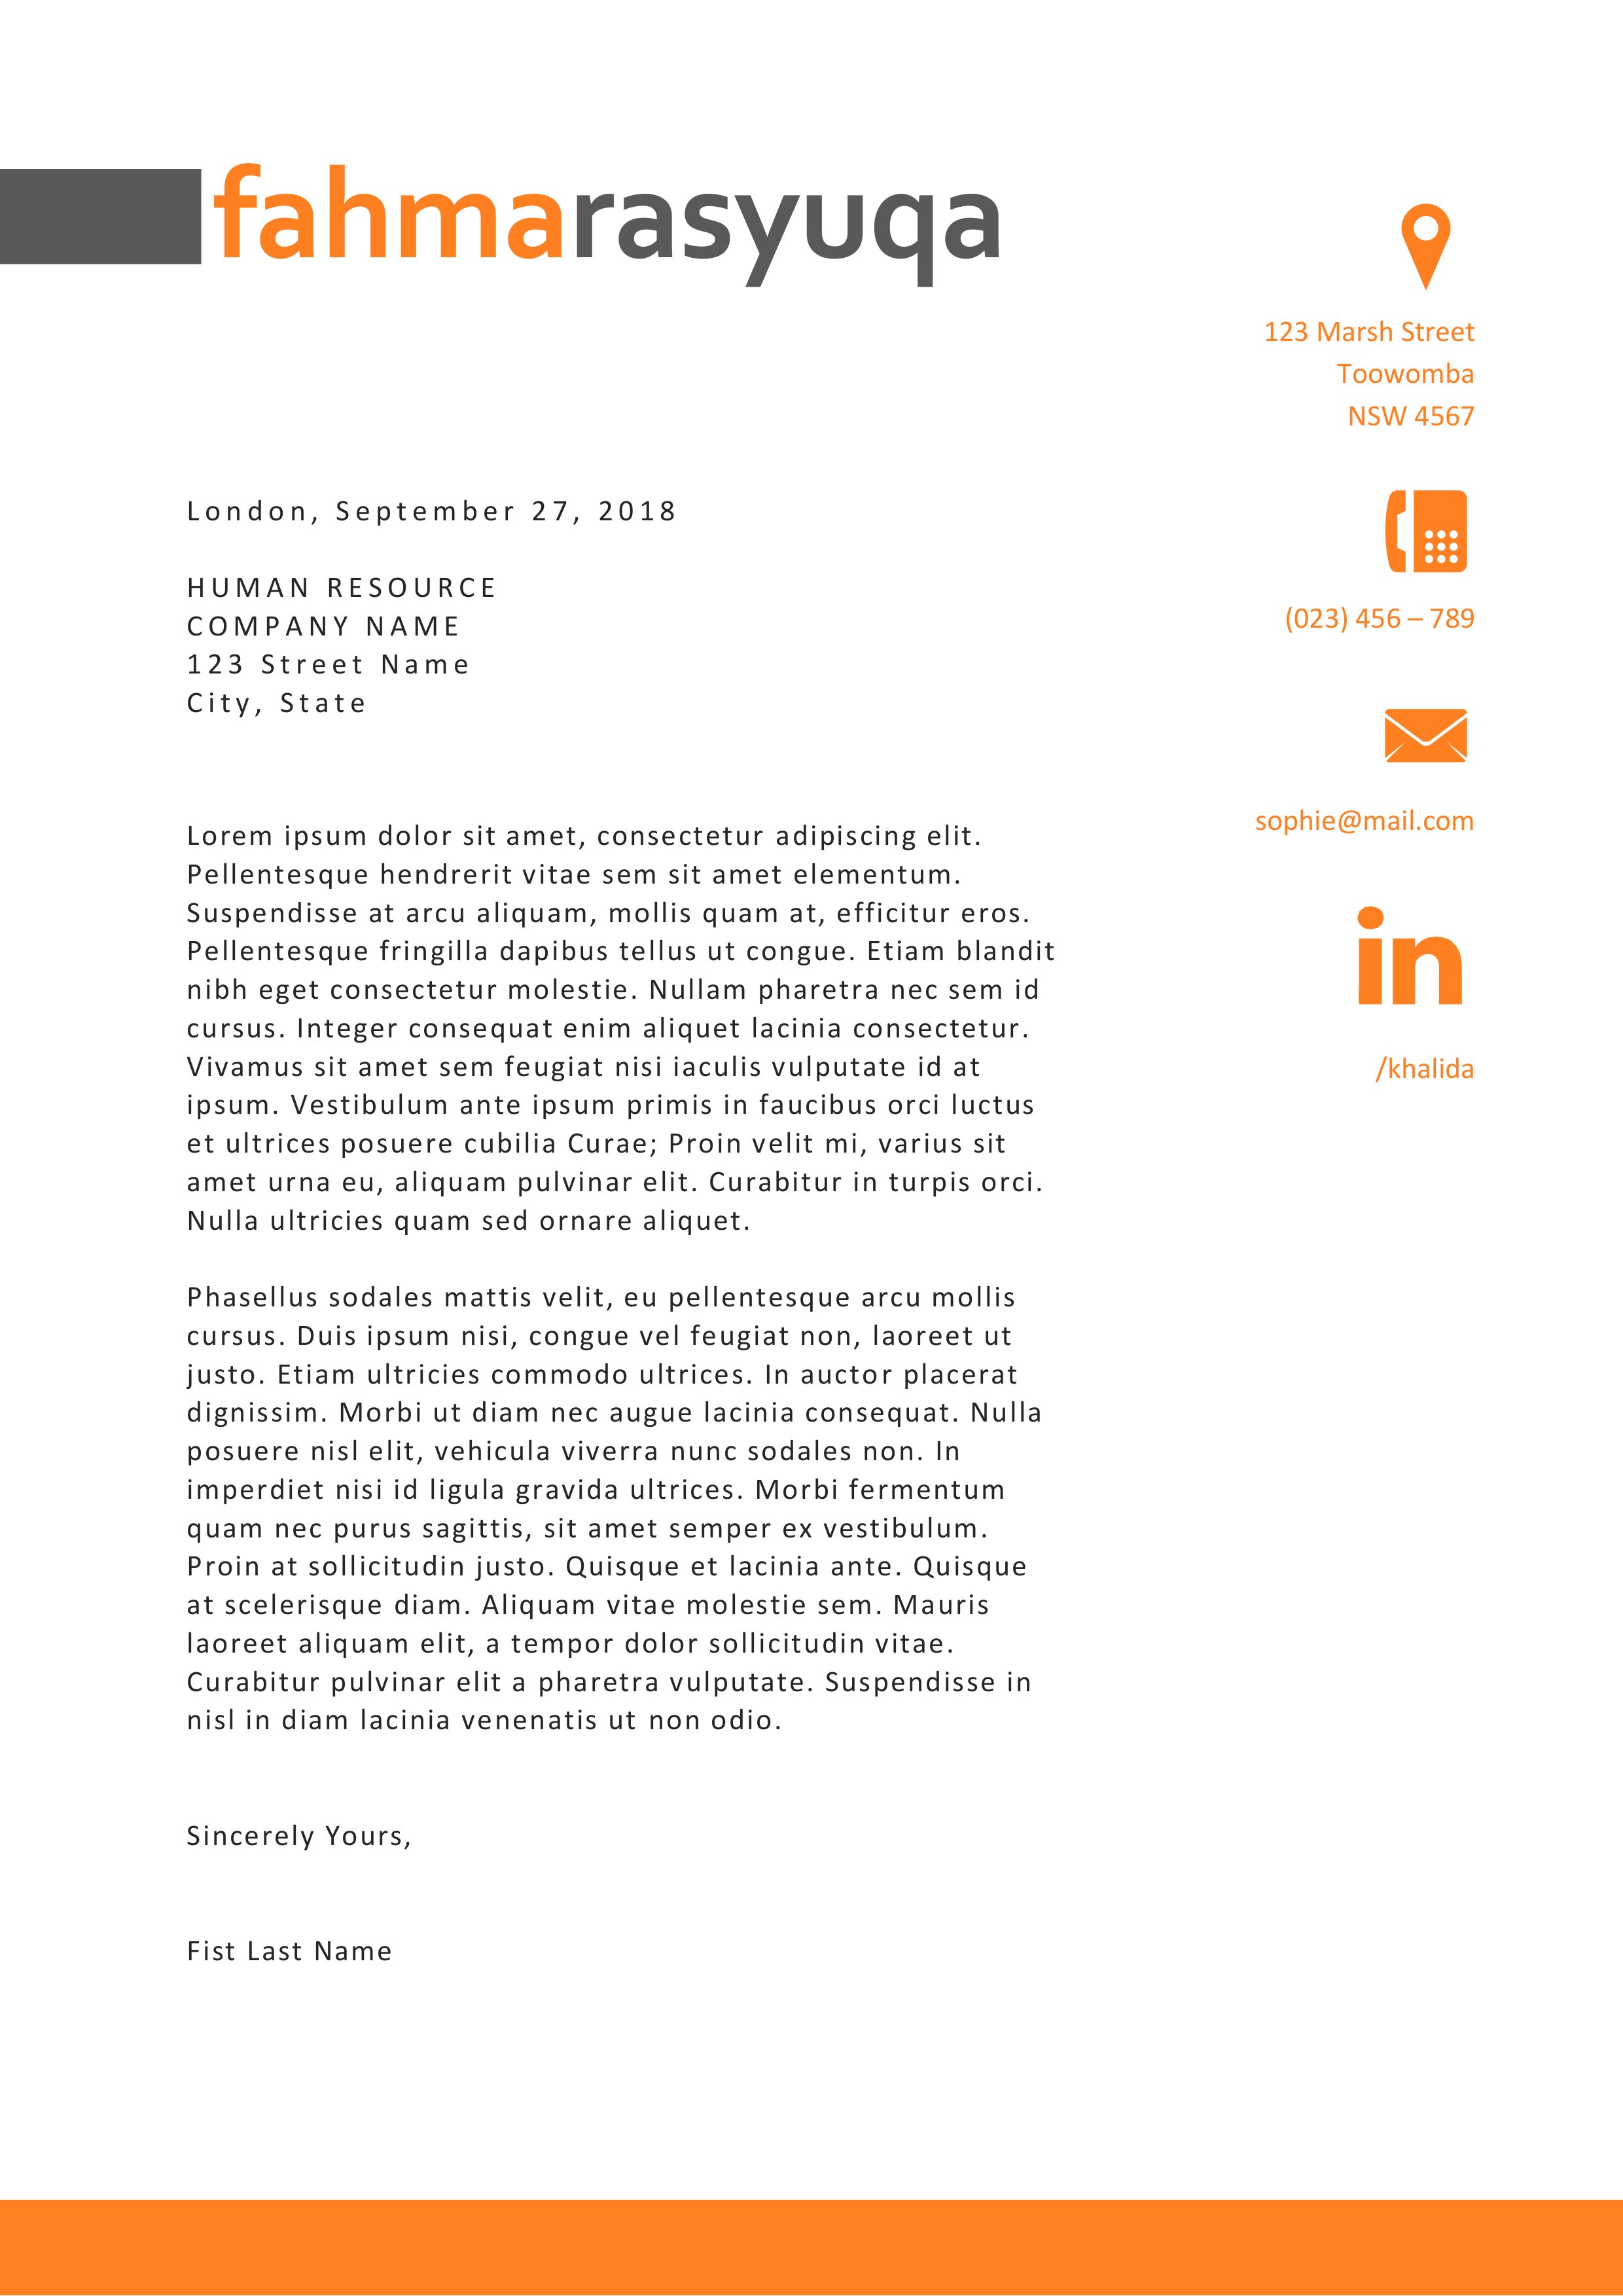 Orange 3 in 1 resume for MS Word preview image.